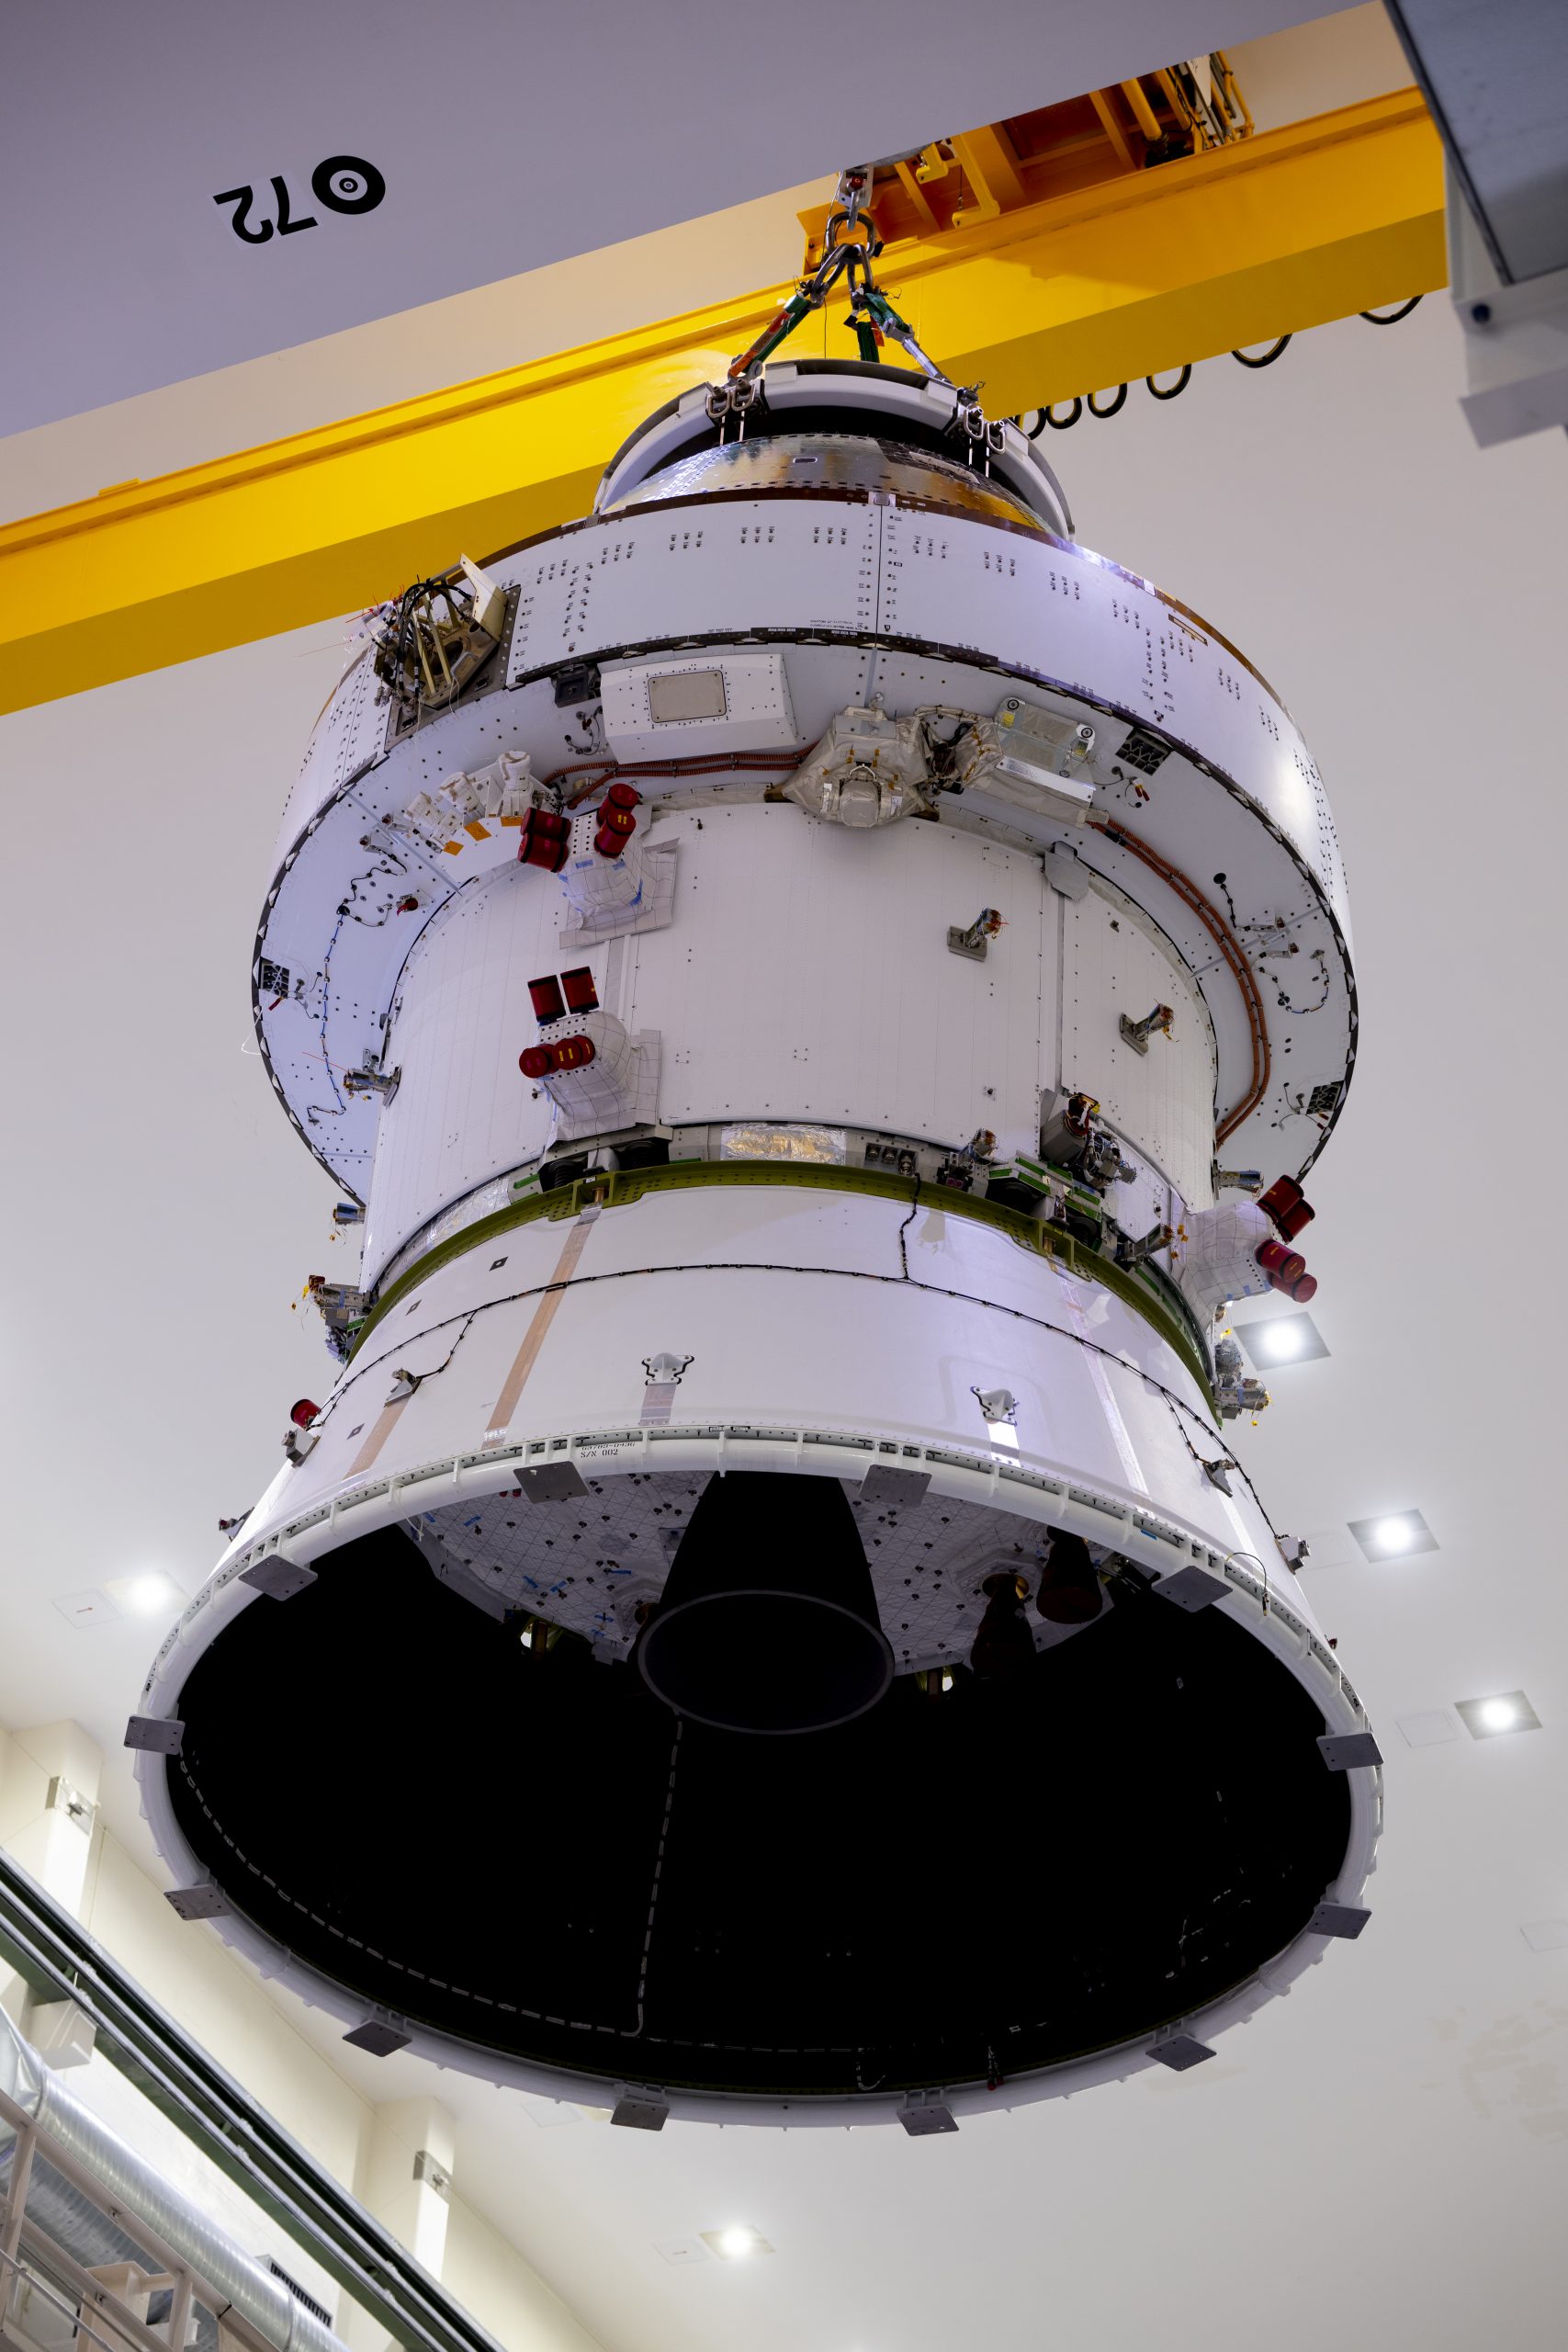 The Orion vehicle that will bring astronauts around the Moon and back for the first time in over 50 years was recently tested in a refurbished altitude chamber used during the Apollo era. The Orion stack, made of the crew module, crew module adapter, the second European Service Module and spacecraft adapter, was lifted into one of two altitude chambers on 4 April at the Neil Armstrong Operations and Checkout Building at the Kennedy Space Center, Florida, USA. Credit: ESA-S. Corvaja